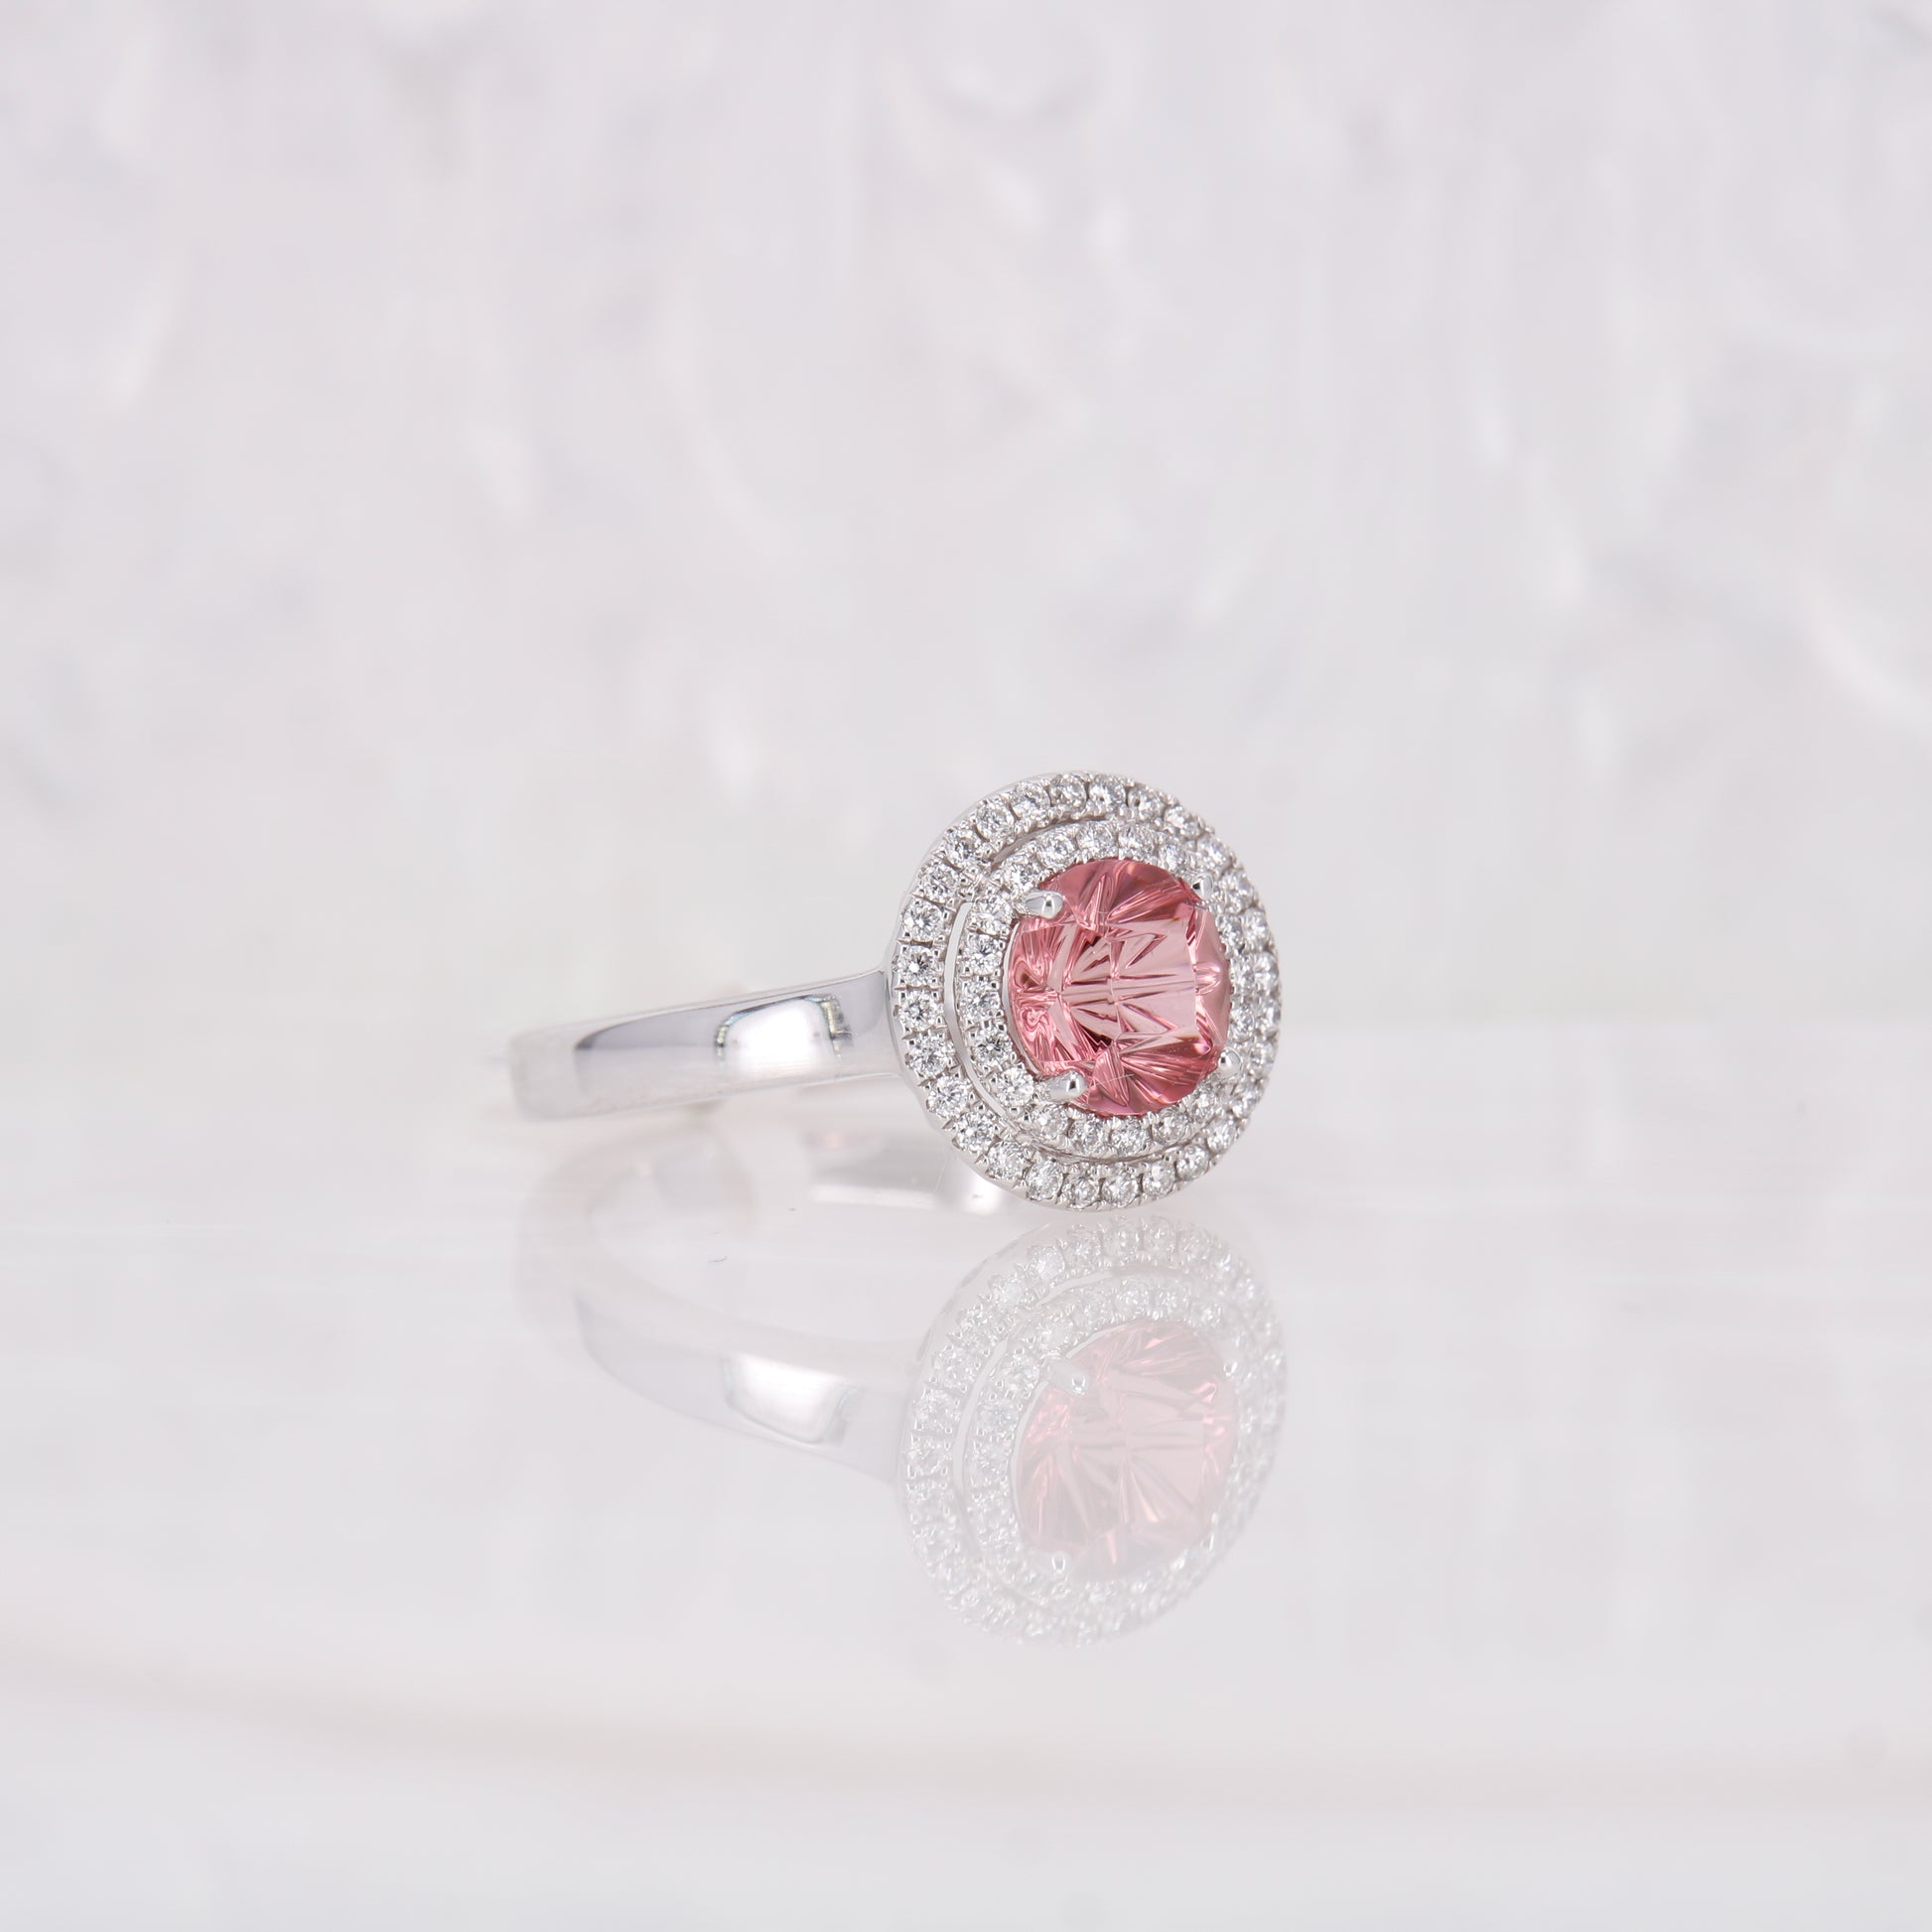 Pink Tourmaline and Diamond ring. Featuring a striking faceted 1.49ct round brilliant cut carved pink tourmaline and complimented by a double halo of diamonds.